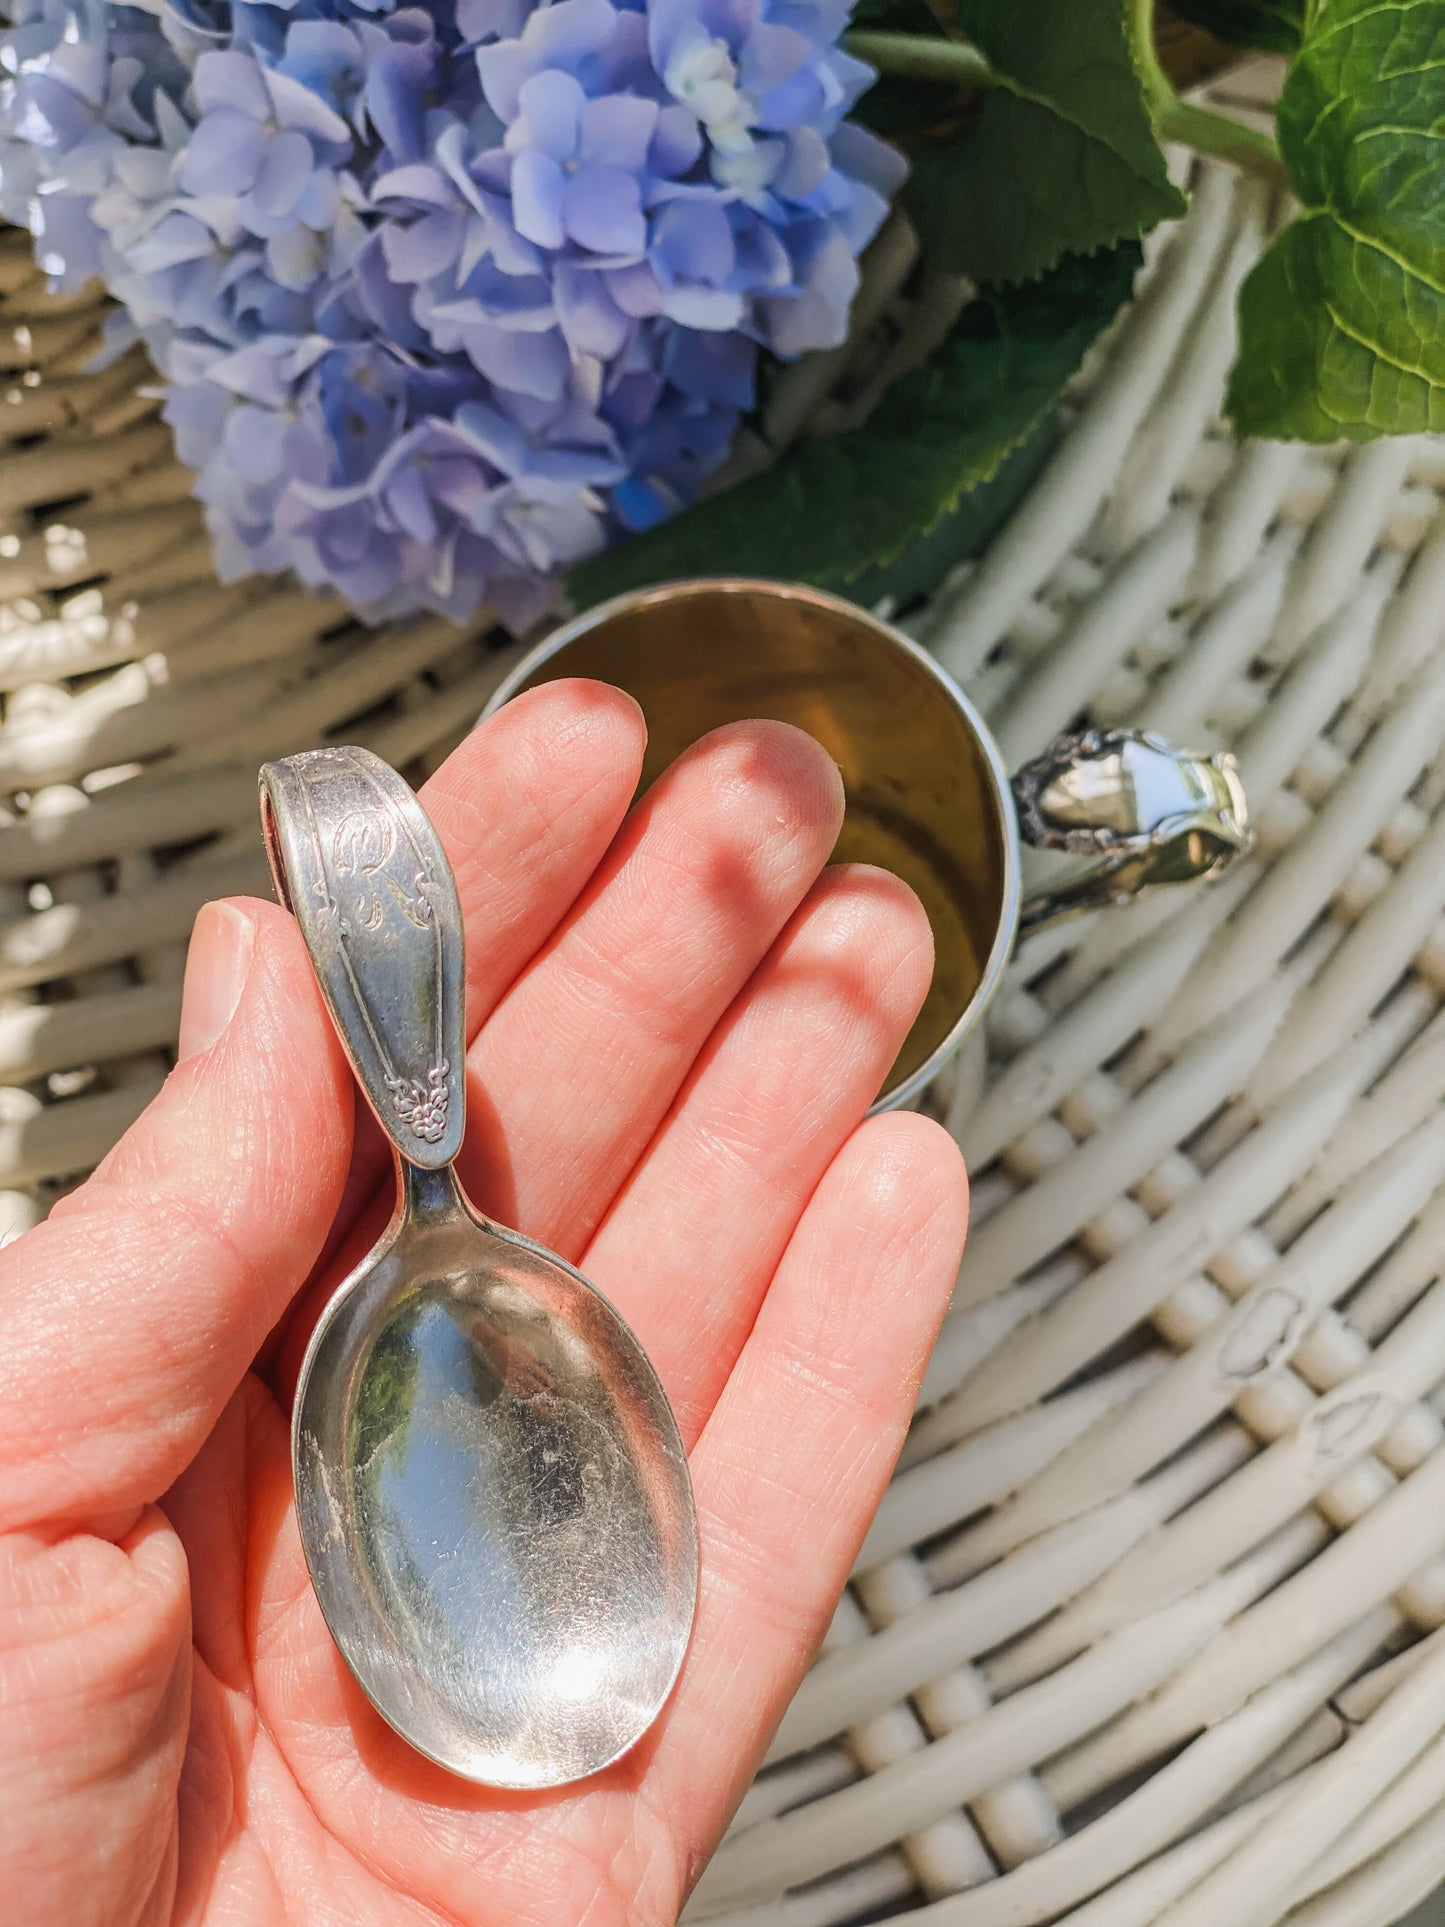 Antique Silver Plated Baby Cup and Spoon